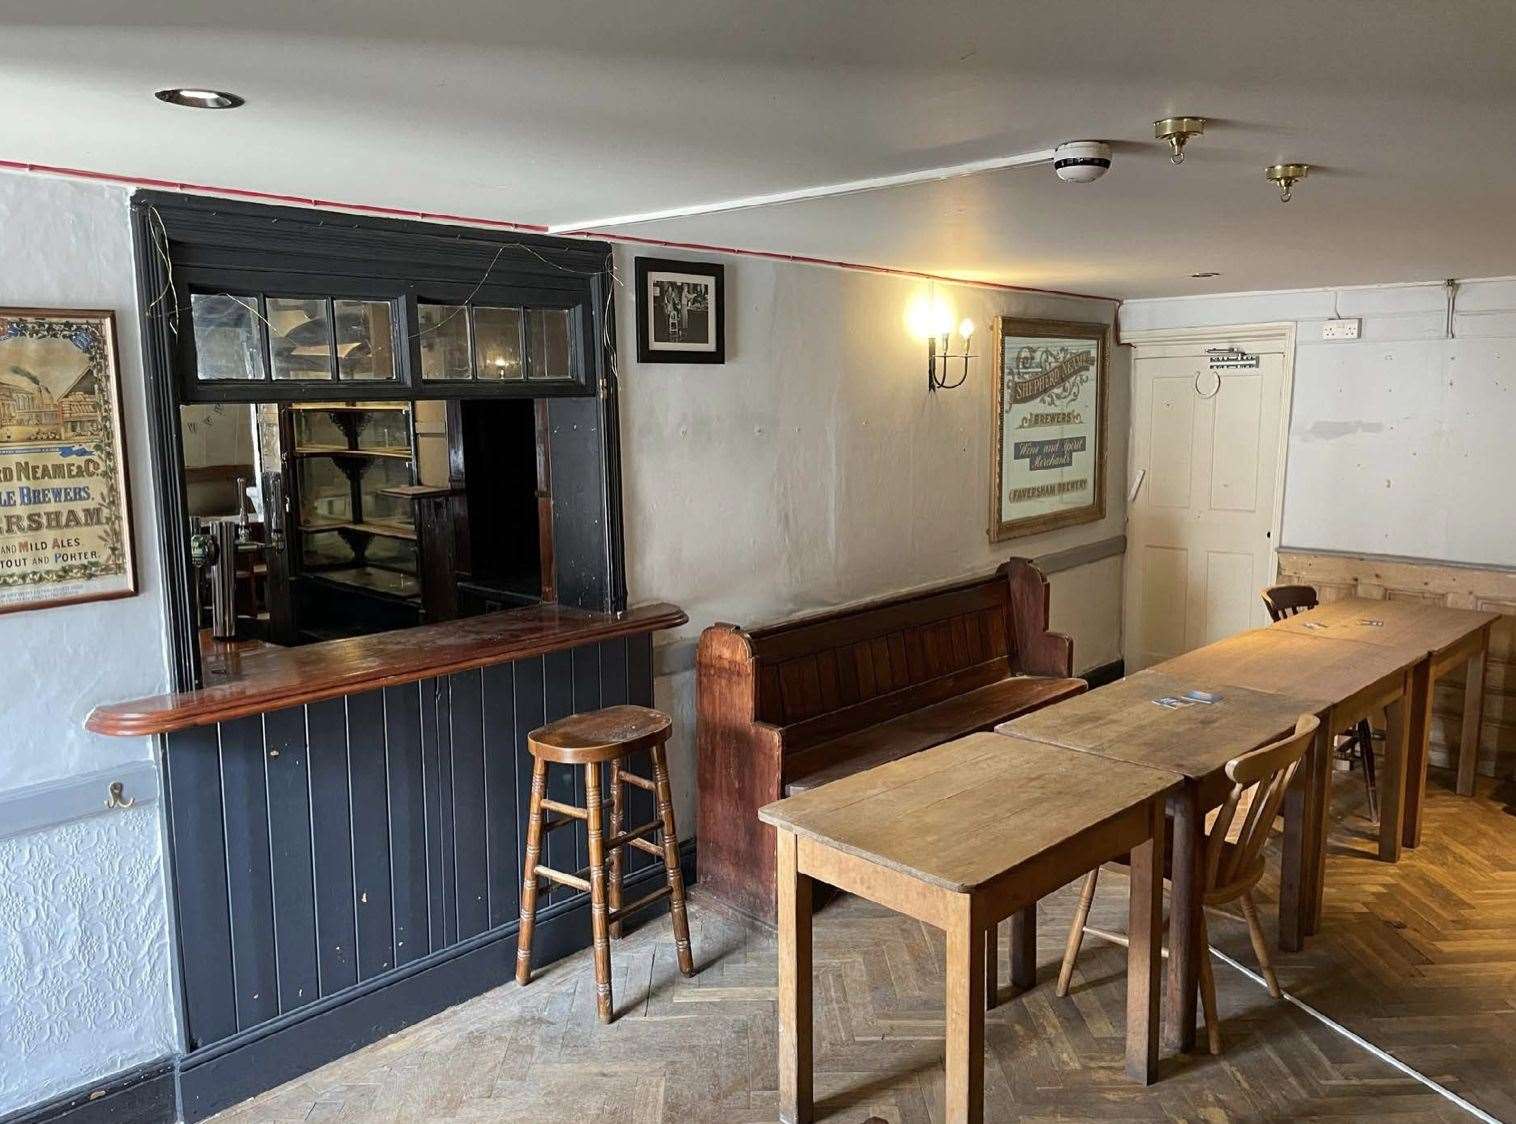 The Plough and Harrow could become a takeaway